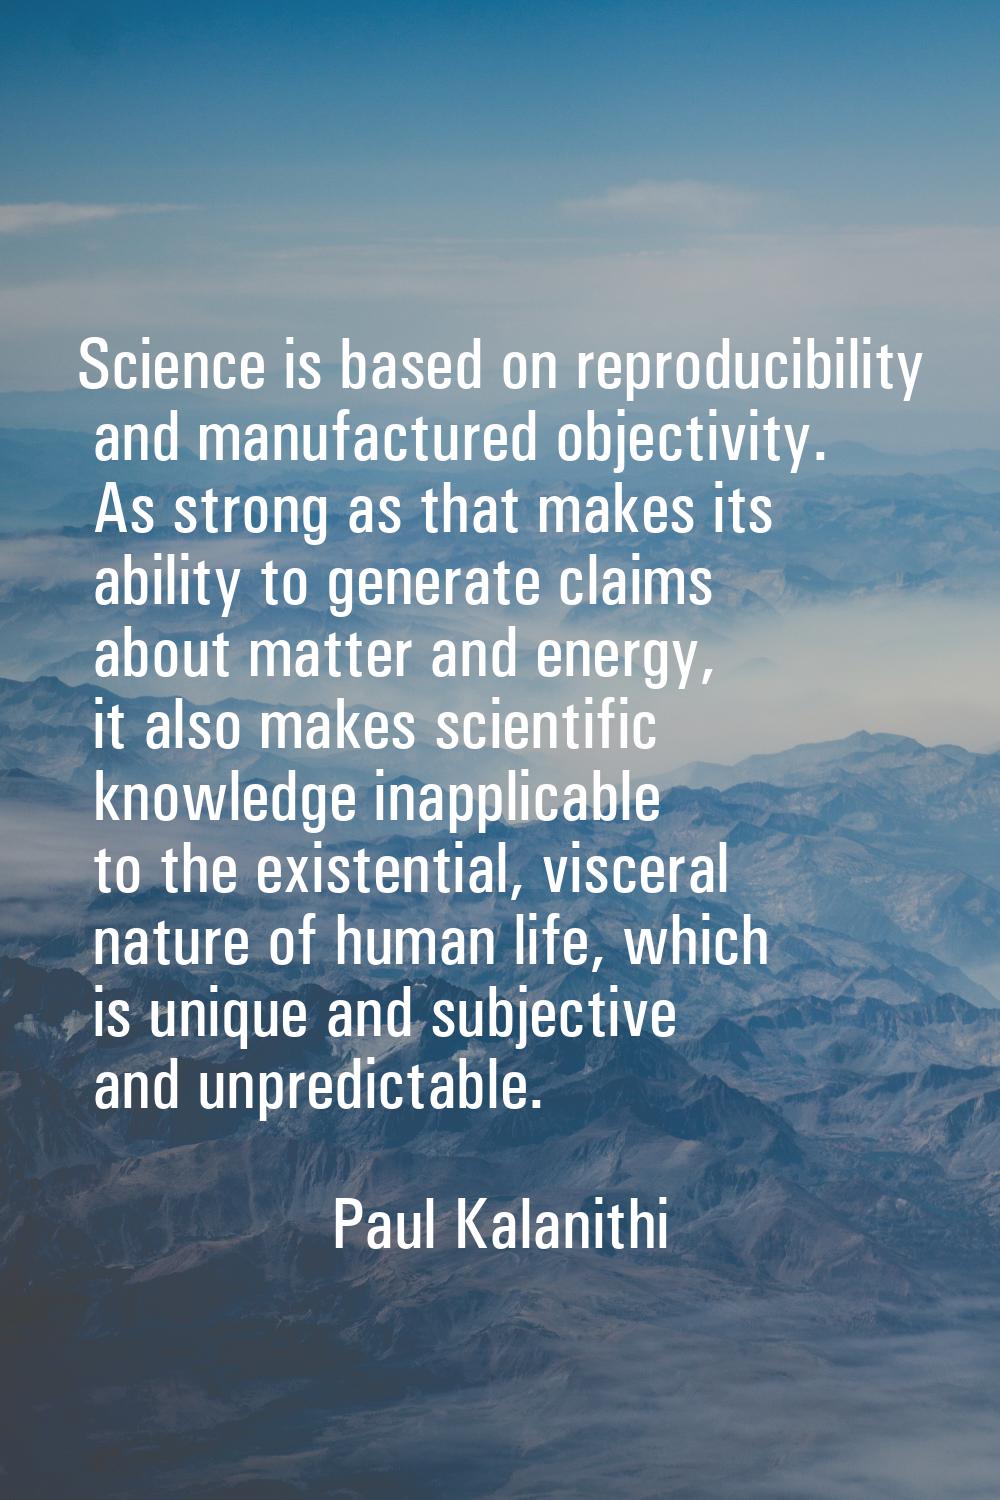 Science is based on reproducibility and manufactured objectivity. As strong as that makes its abili